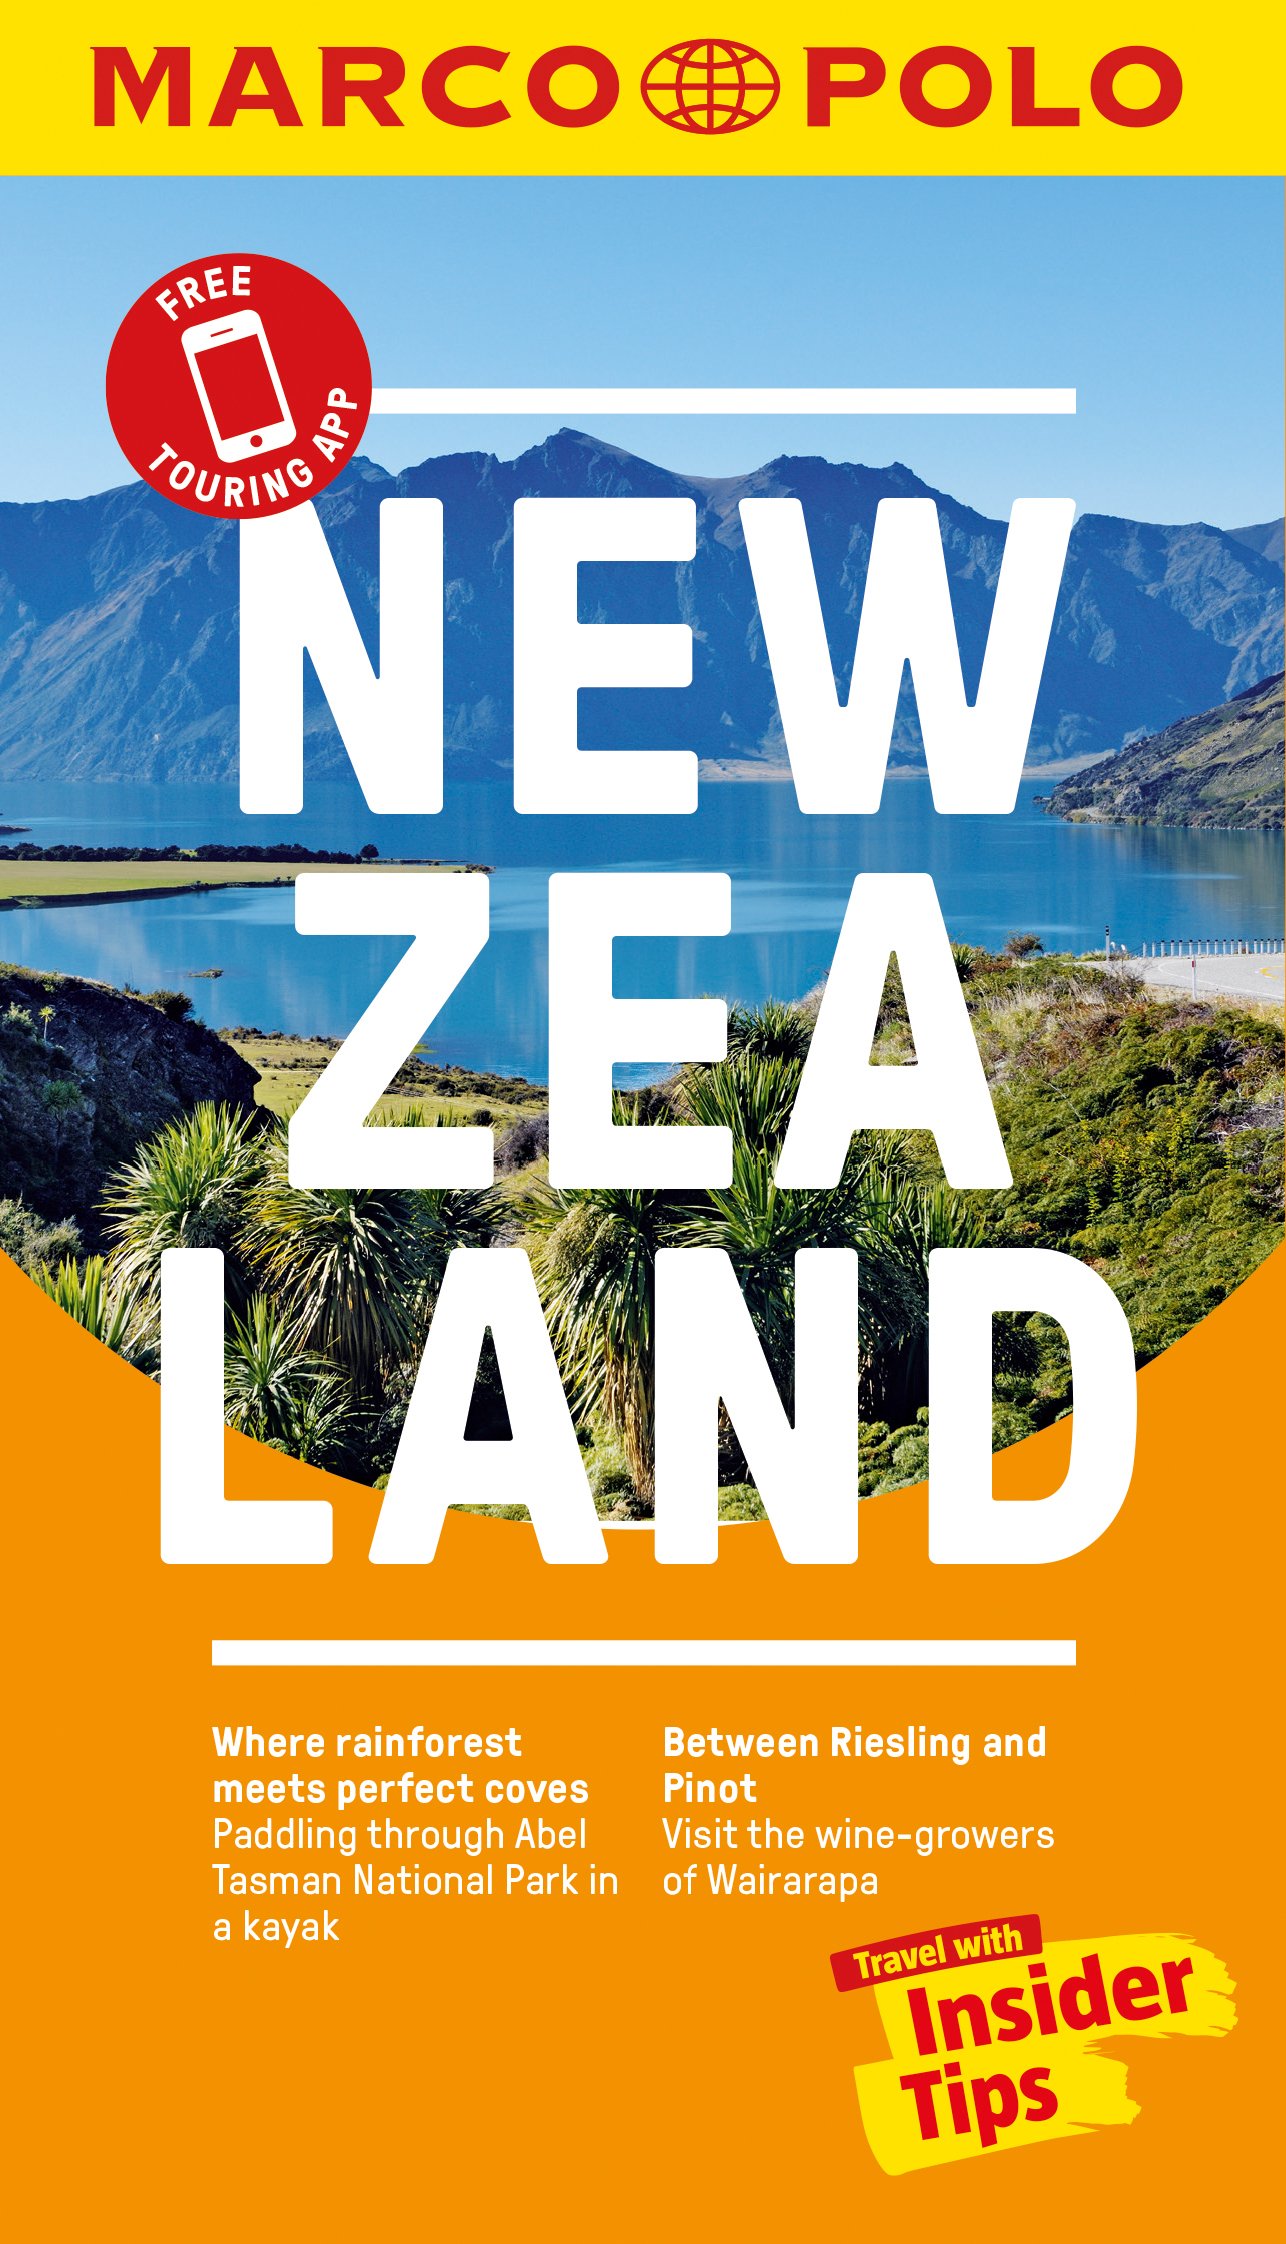 New Zealand Marco Polo Pocket Guide